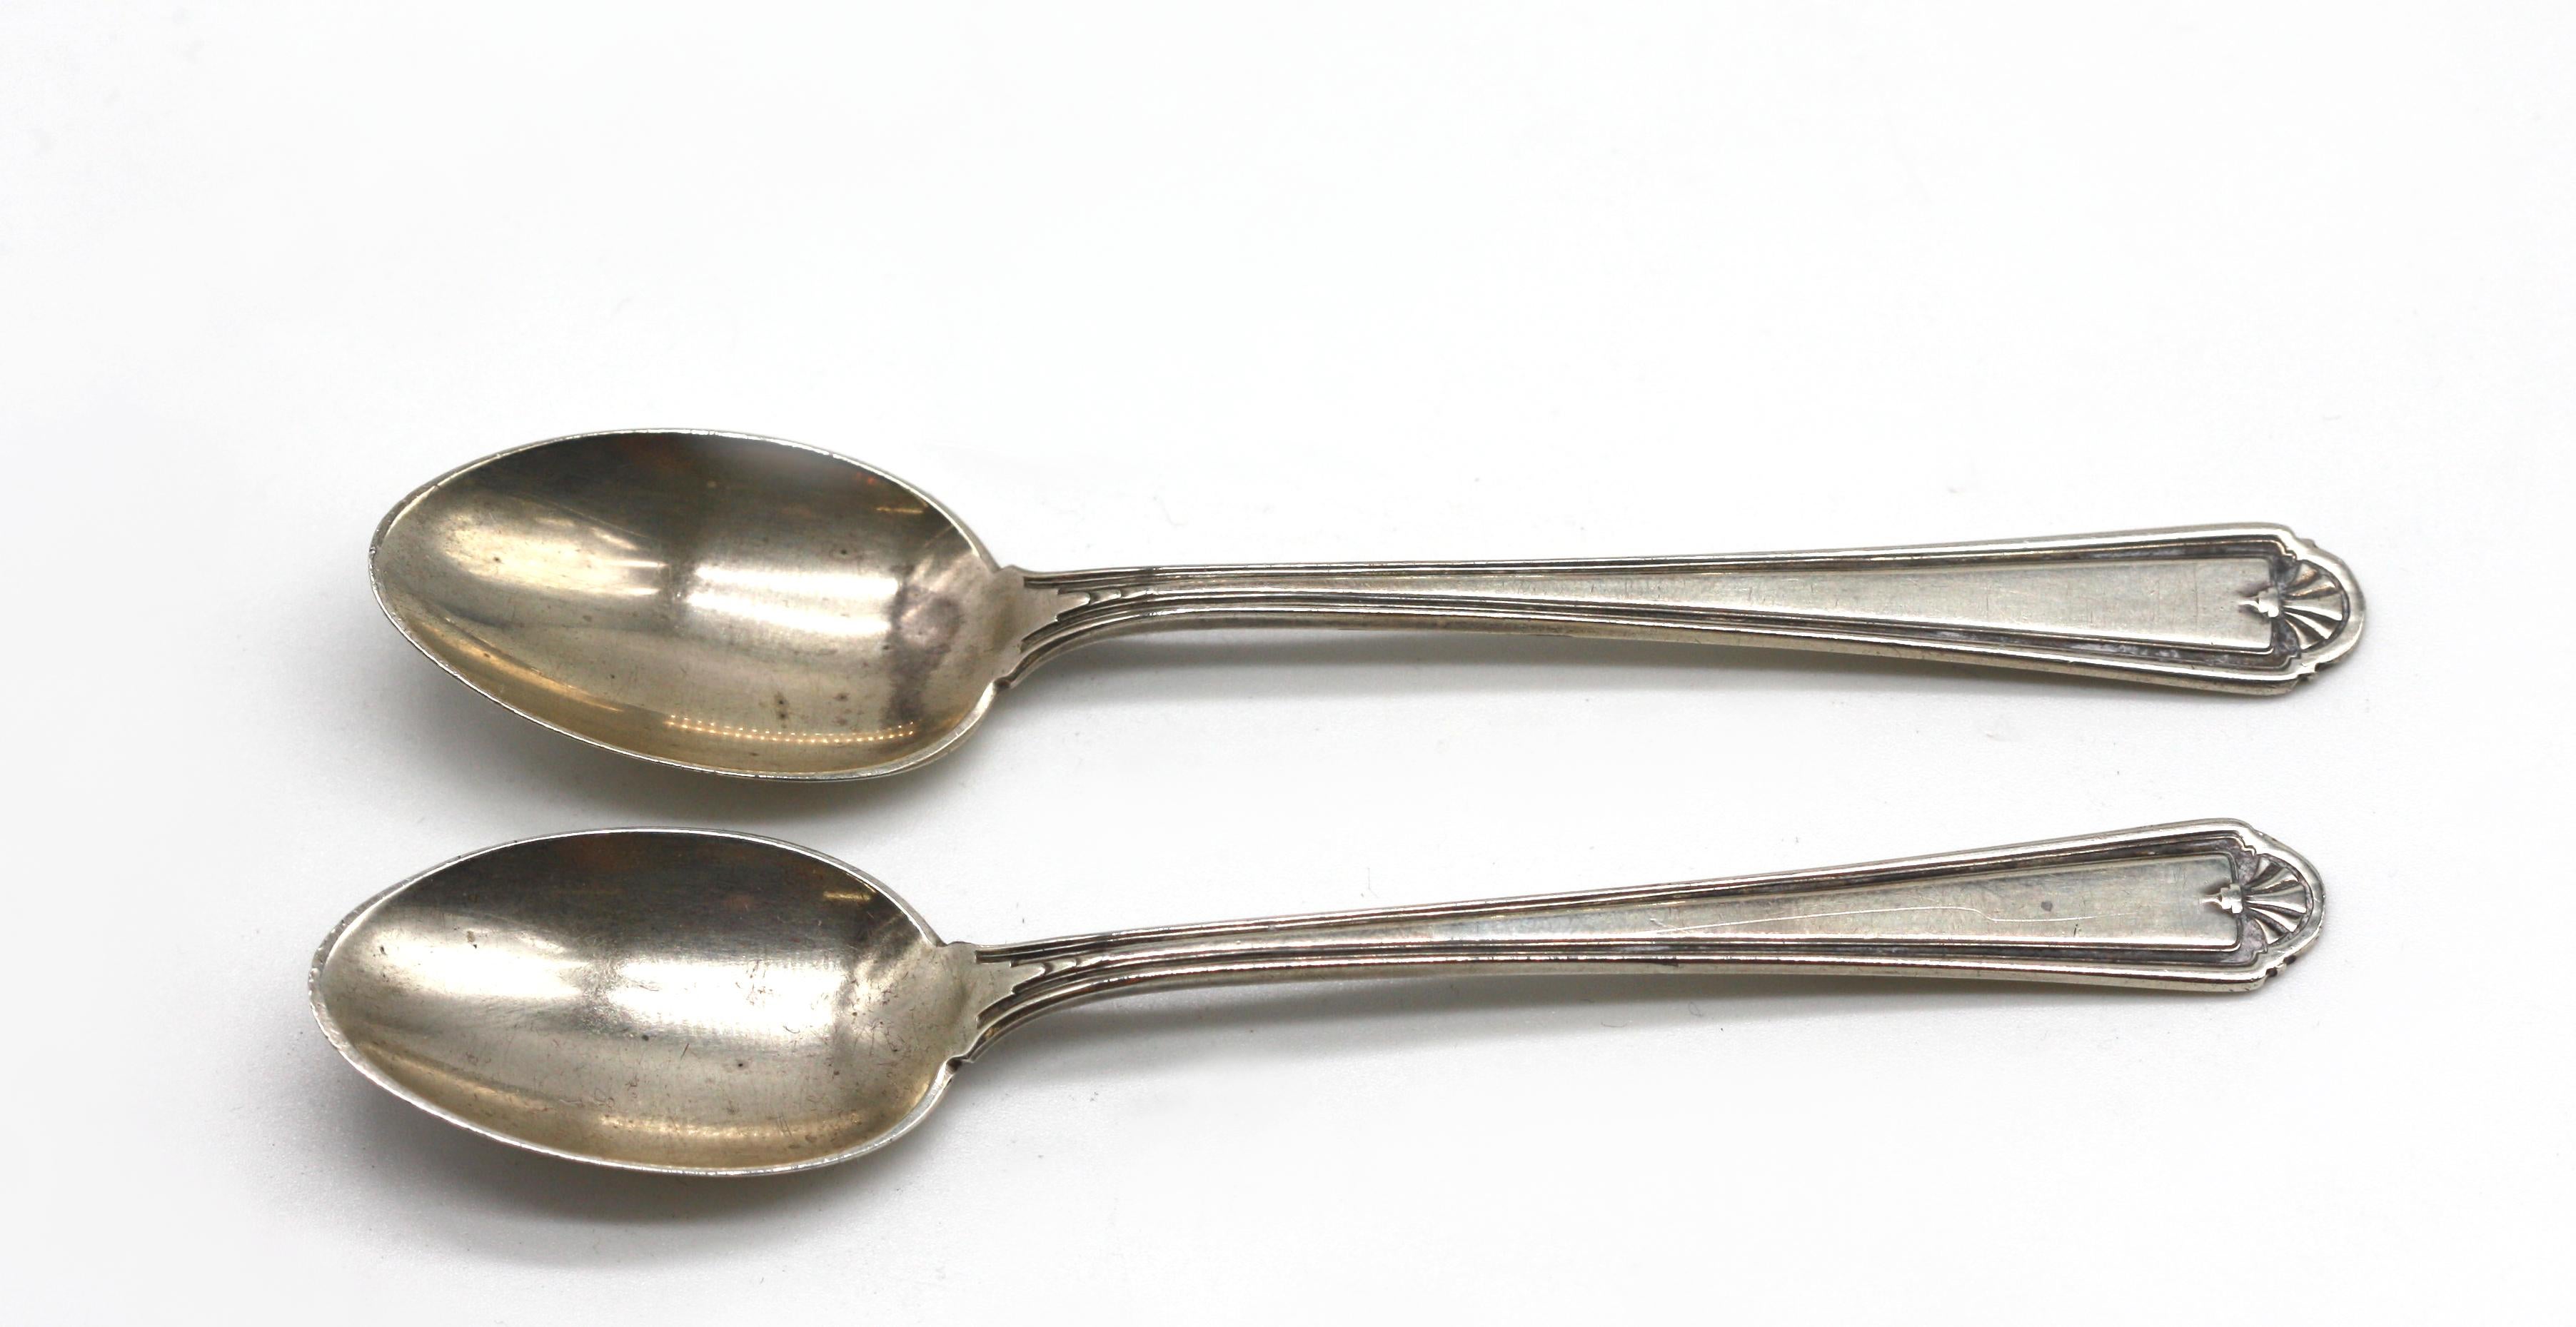  Set of Nine American Sterling Silver Demi-Tasse Spoons In Good Condition For Sale In West Palm Beach, FL